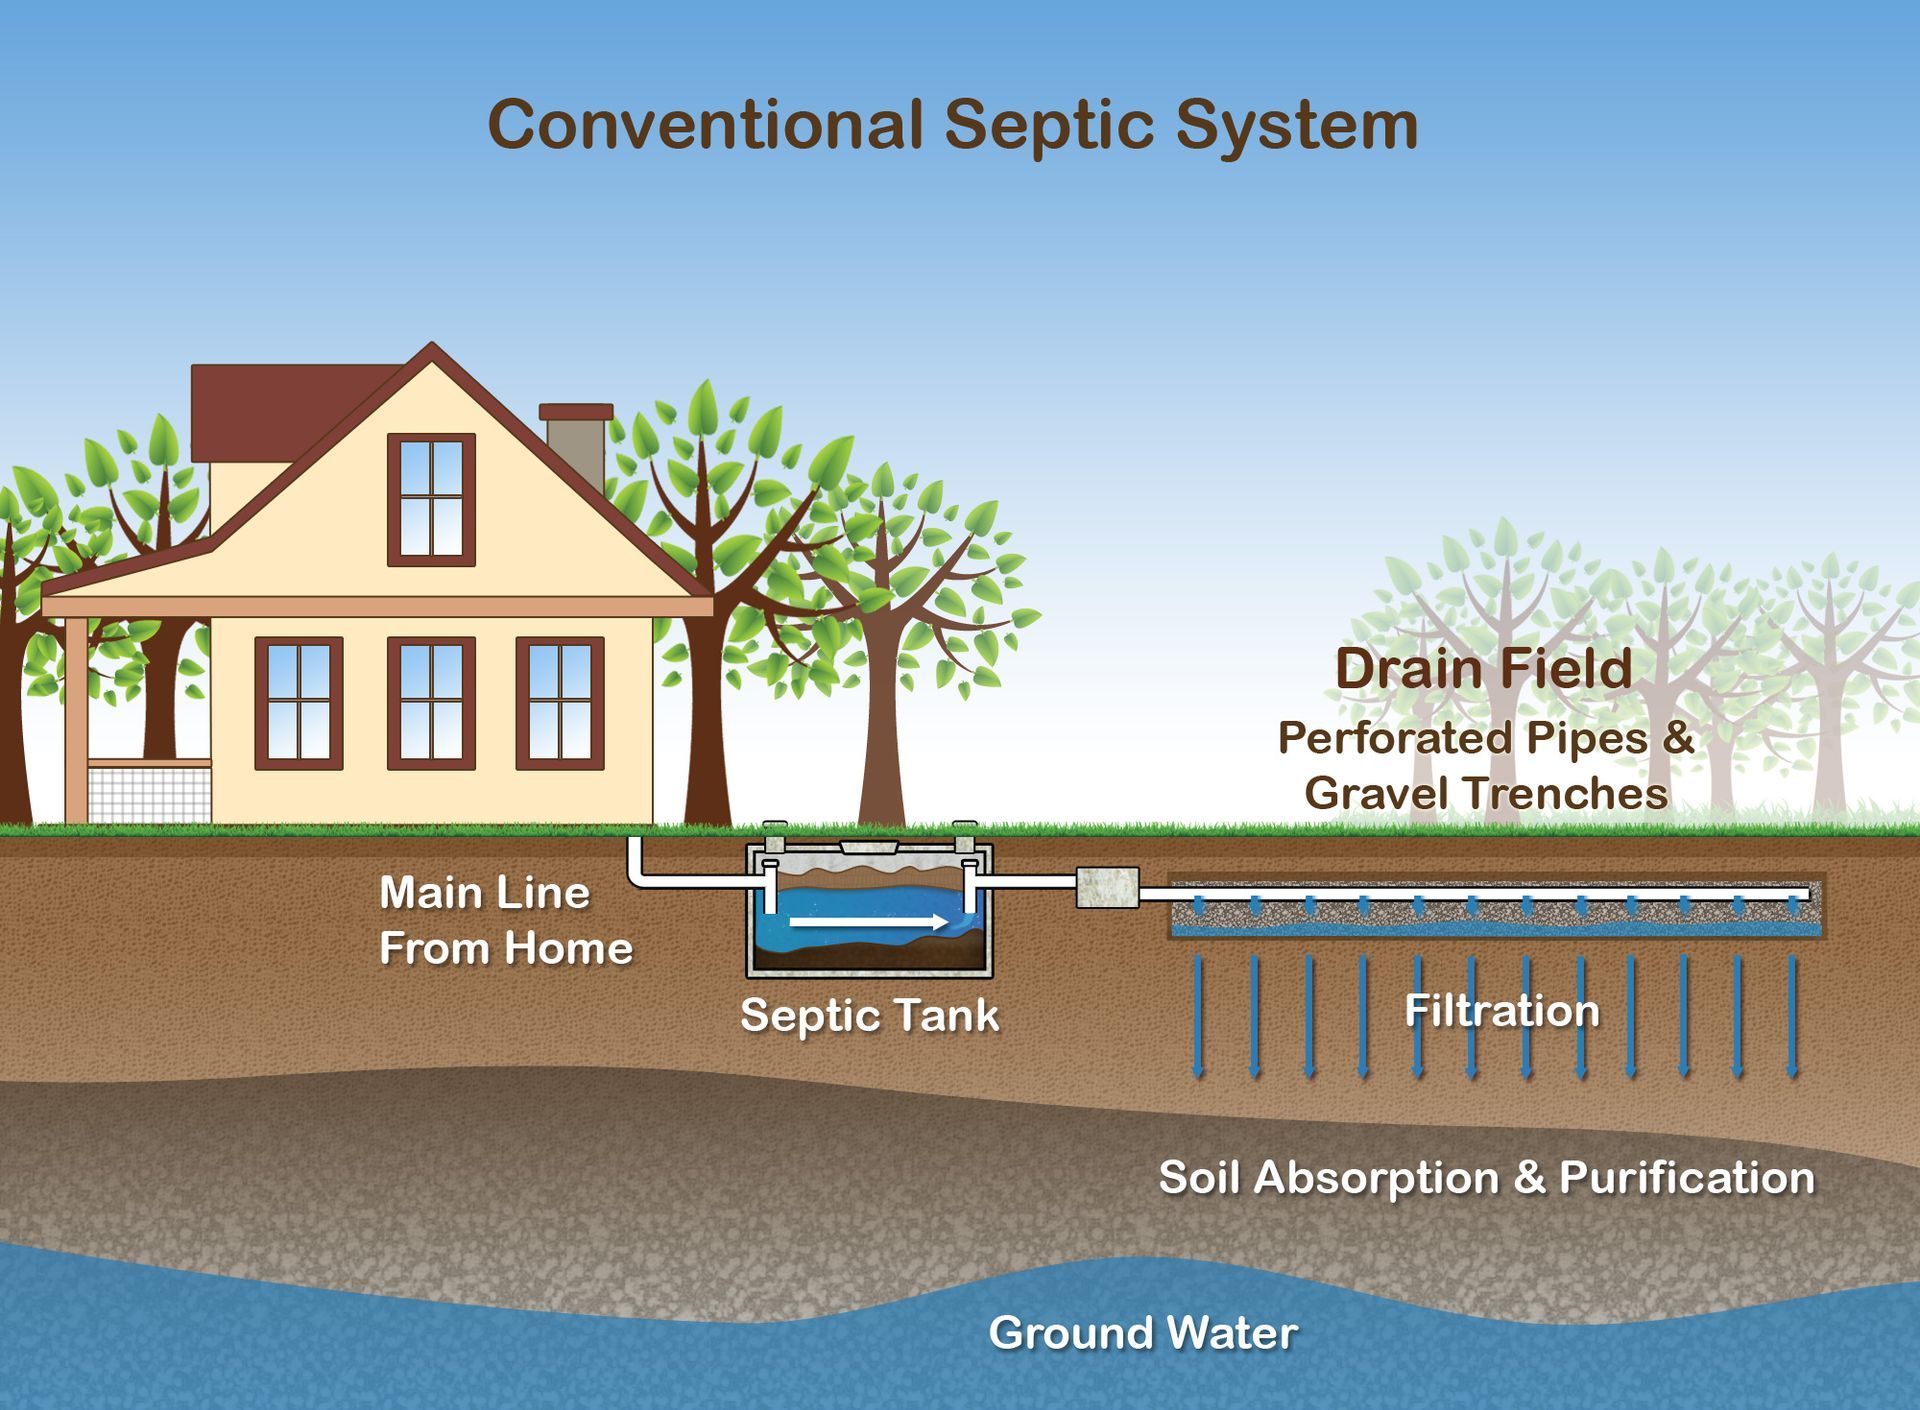 Septic System 101 from Clean earth septic service in Van Etten NY